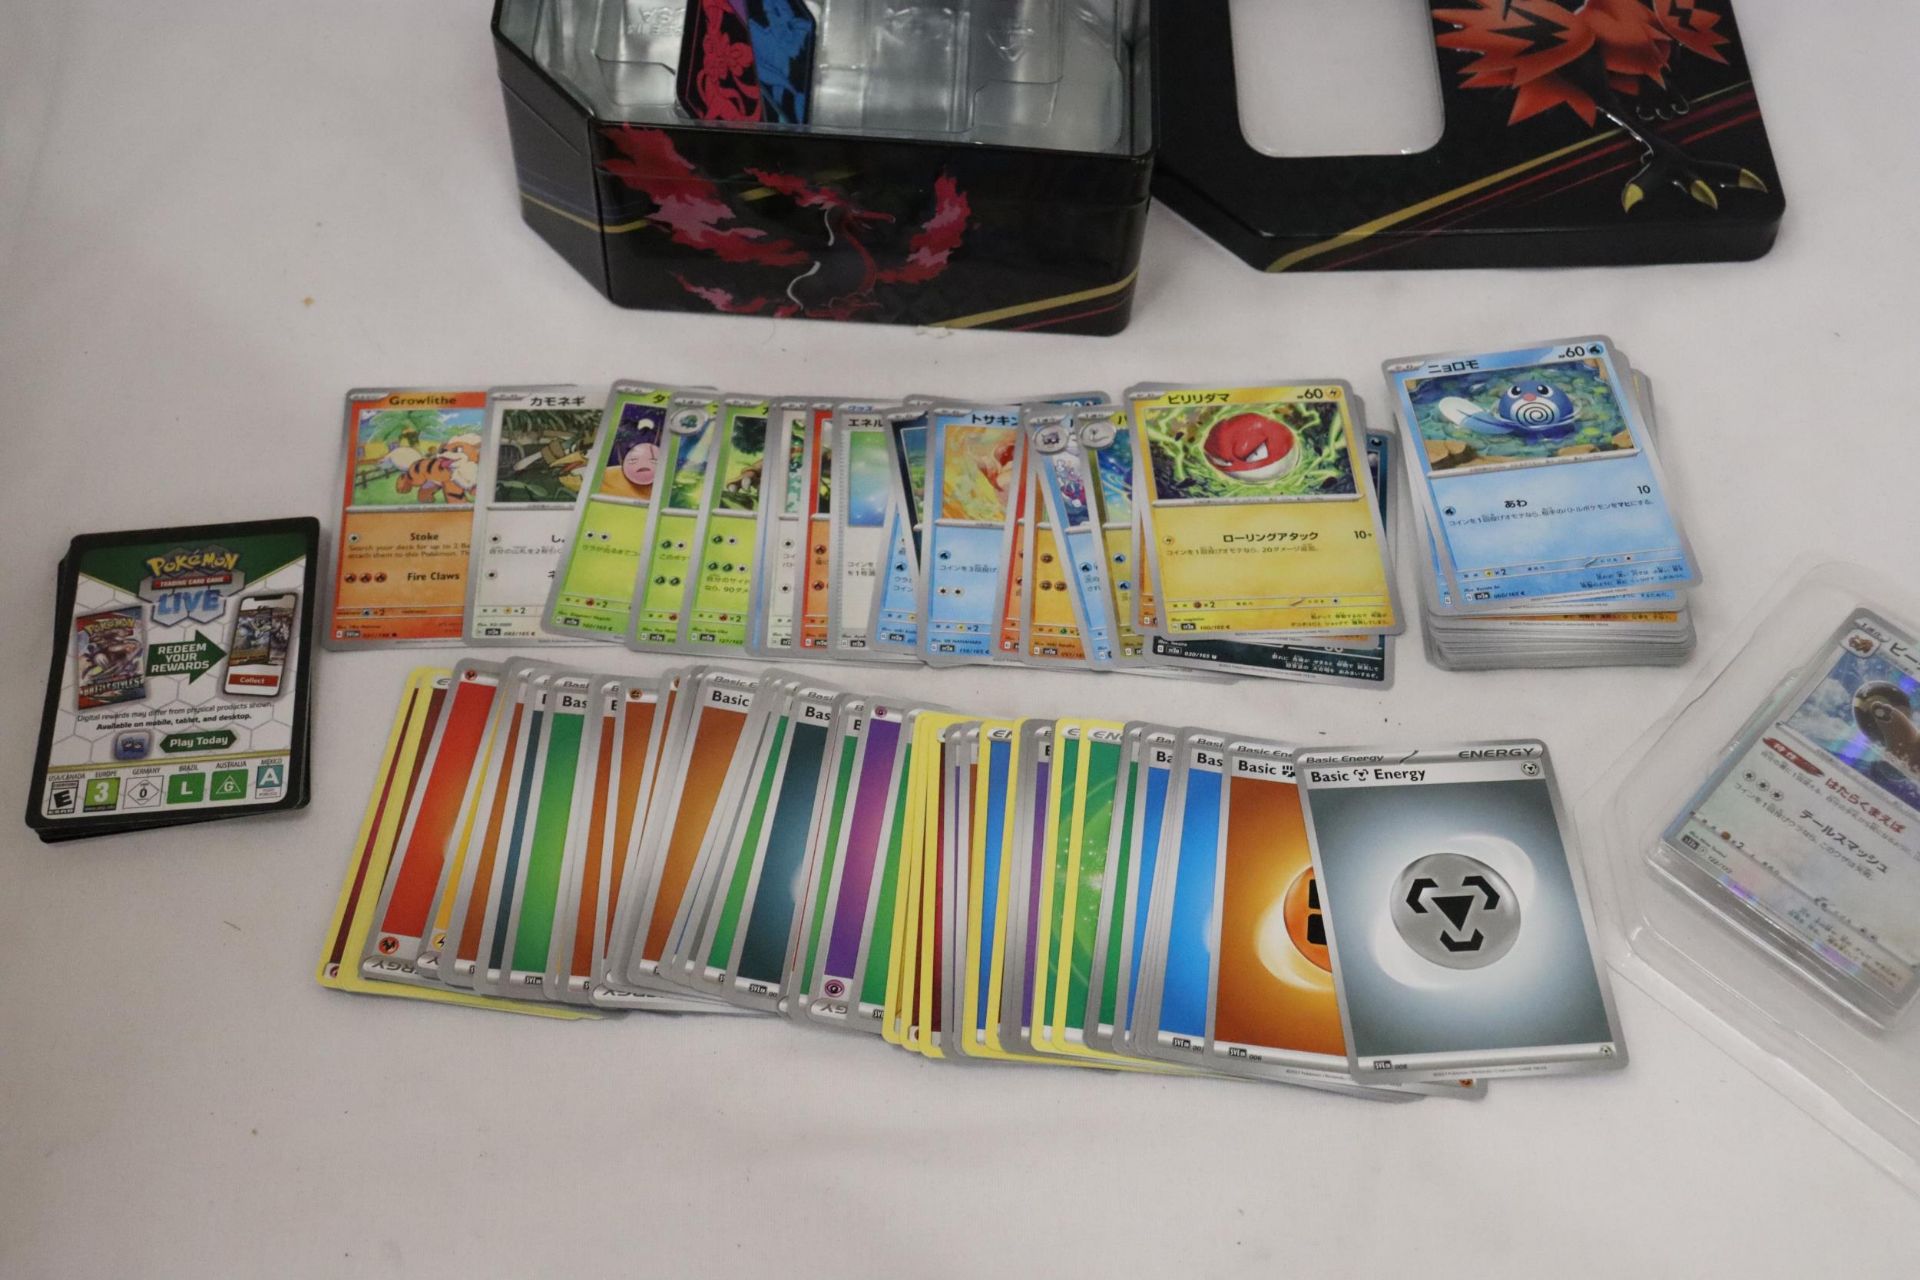 A POKEMON COLLECTOR'S TIN FULL OF JAPANESE CARDS